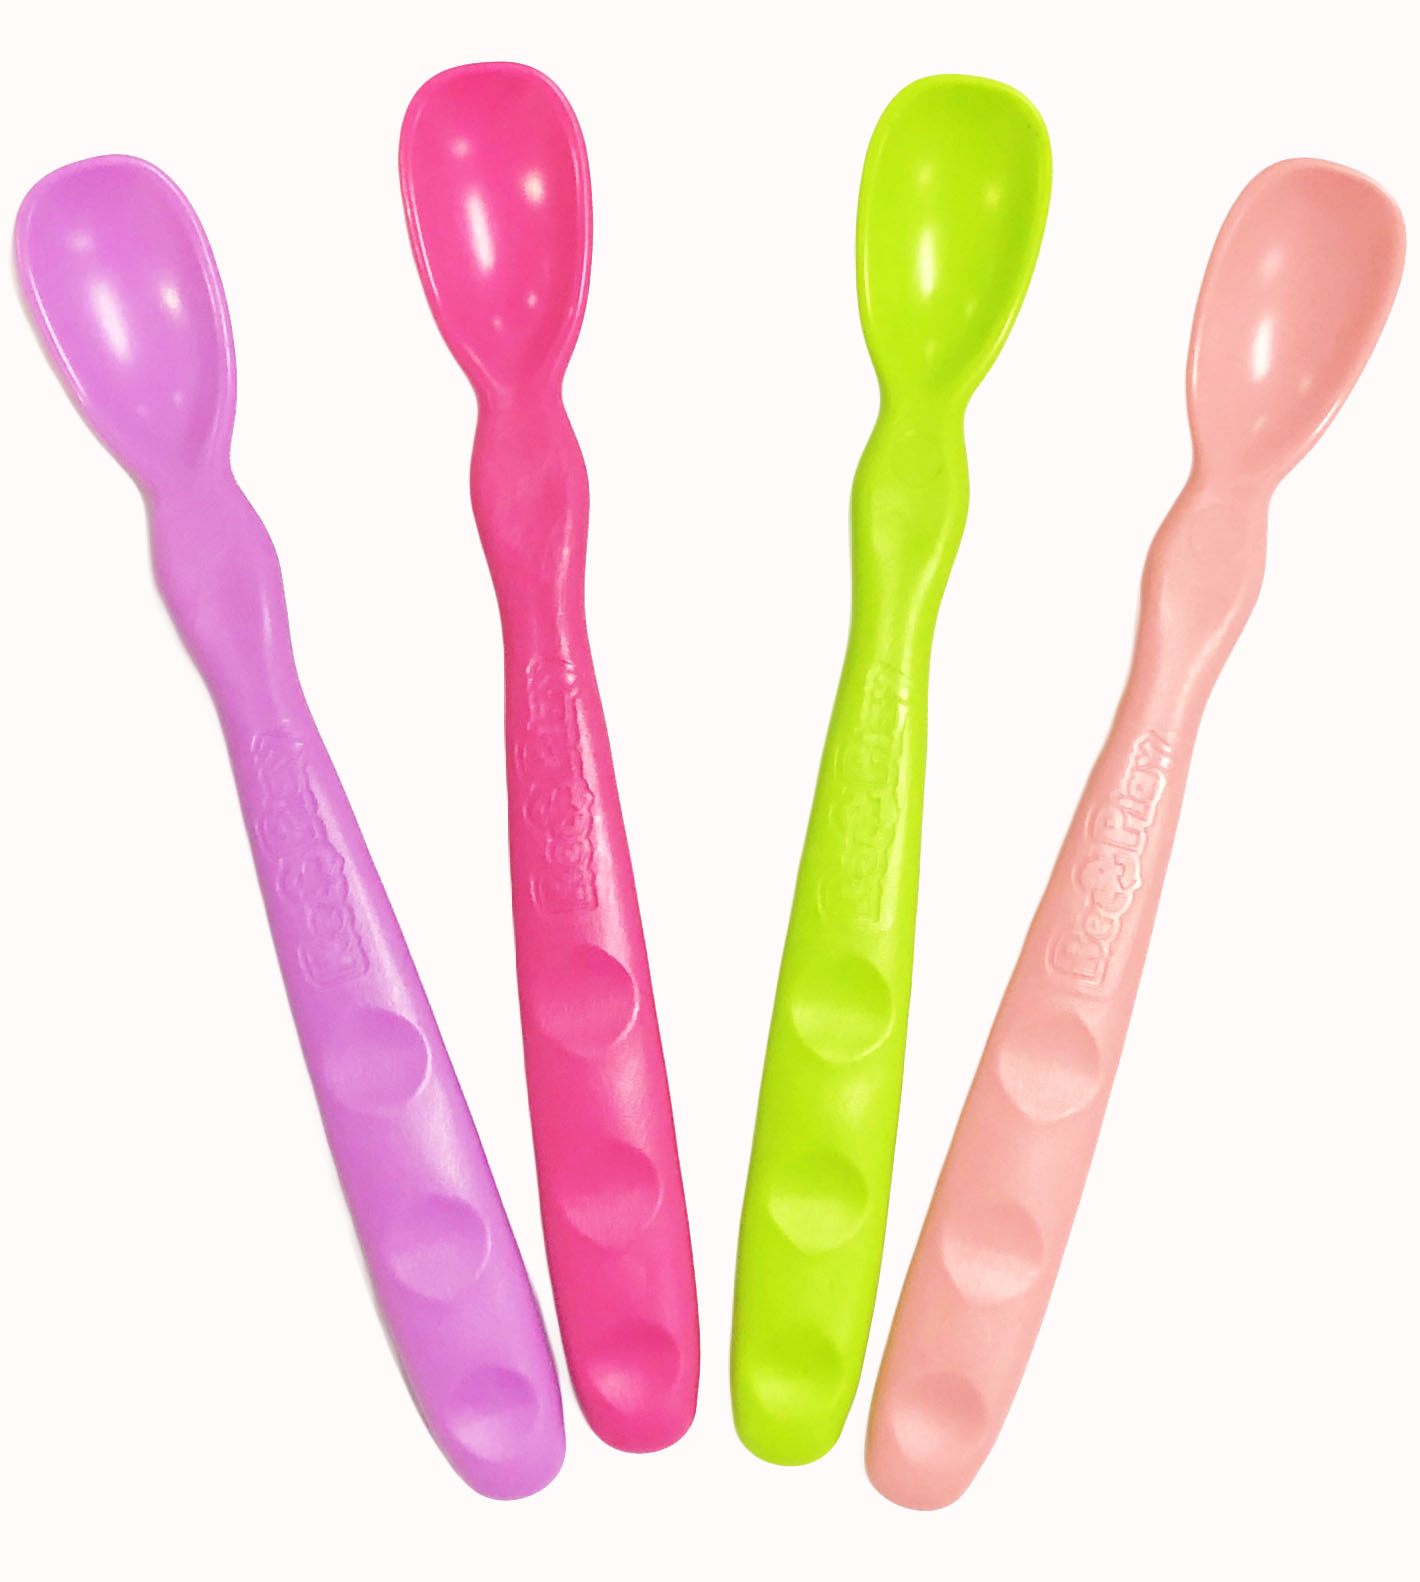 replay-infant-spoons-4pk-pink